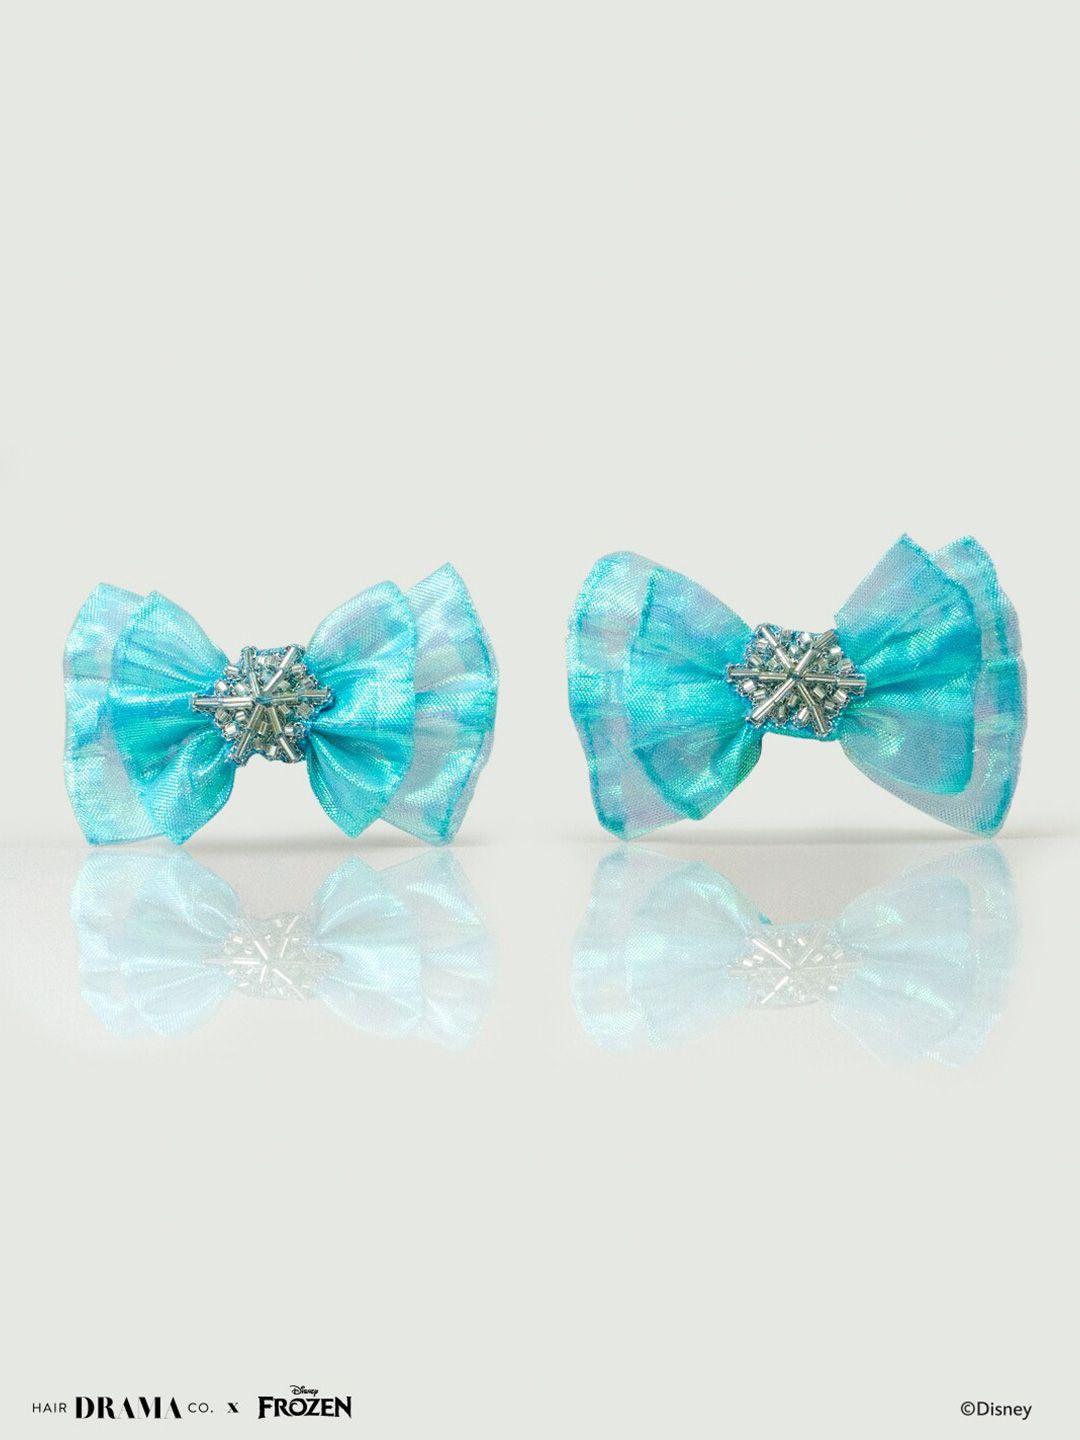 hair drama company girls set of 2 blue & silver-toned embellished tic tac hair clip